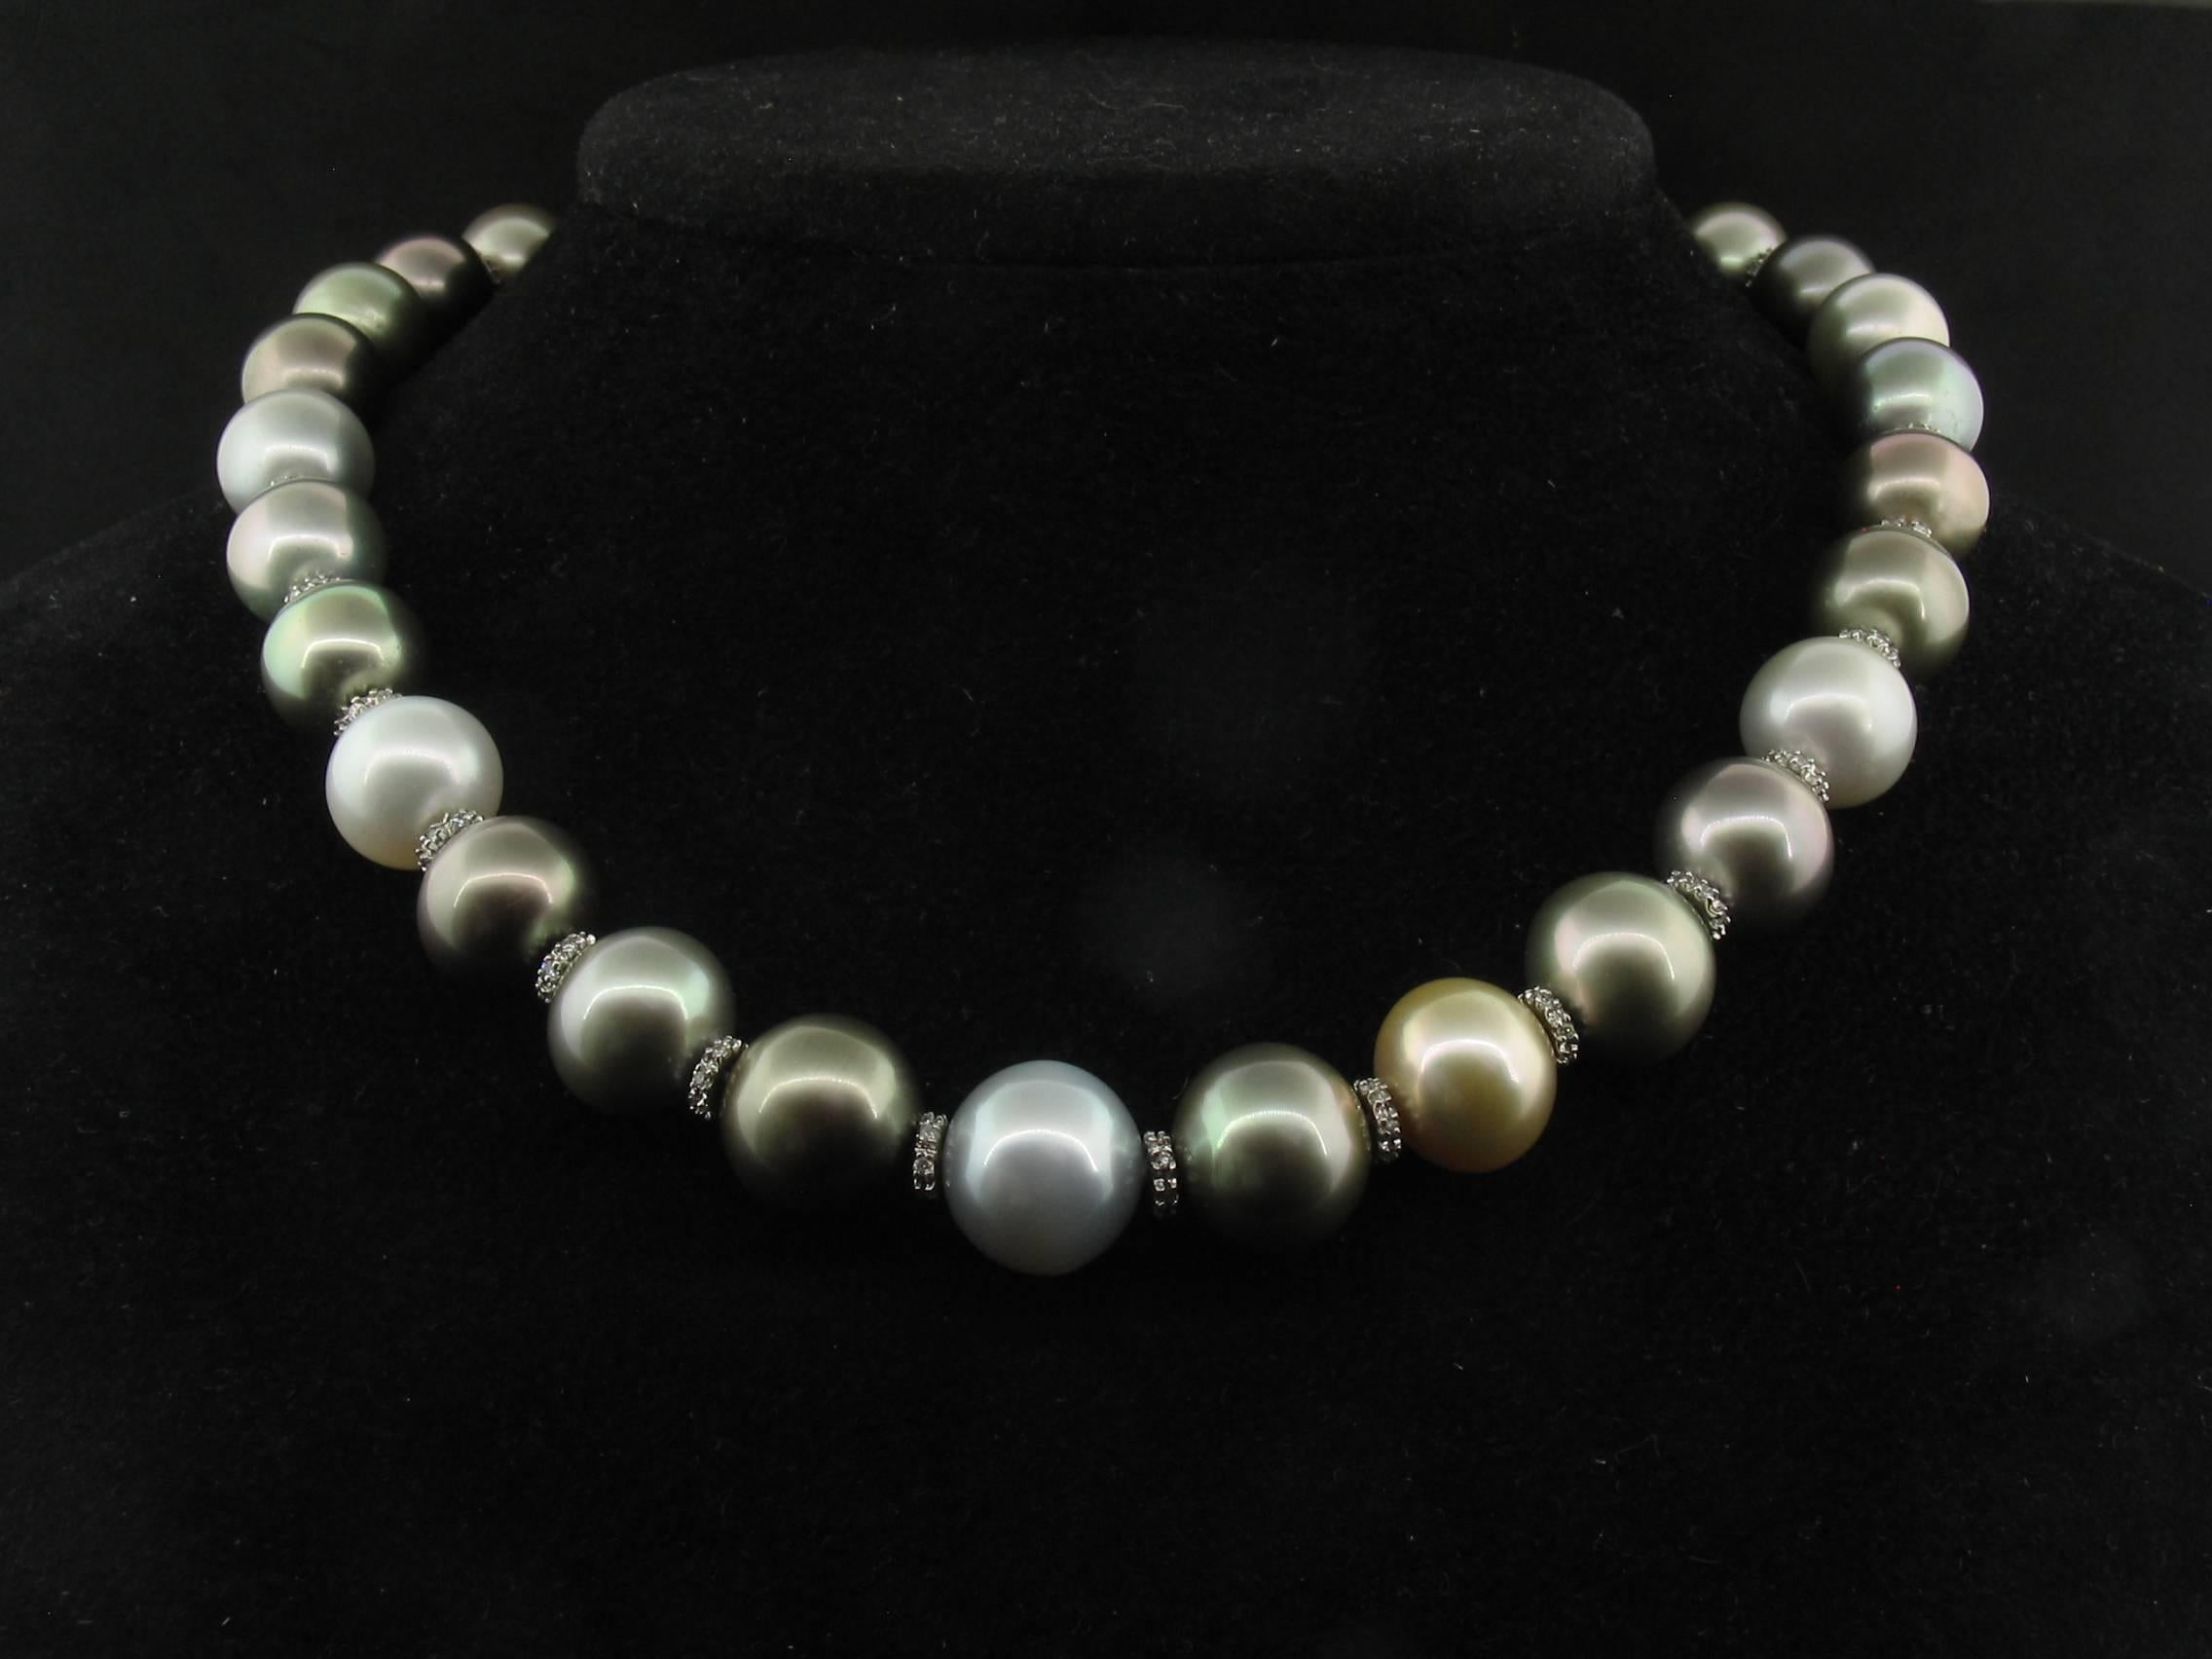 This lovely necklace combines 31 Tahitian South Sea pearls with Diamond rondelles of 18k white gold. The white gold clasp is also accented in Diamonds.  They graduate in size from 12.2mm to 14.9mm and the necklace measures 18 inches long.  Regular